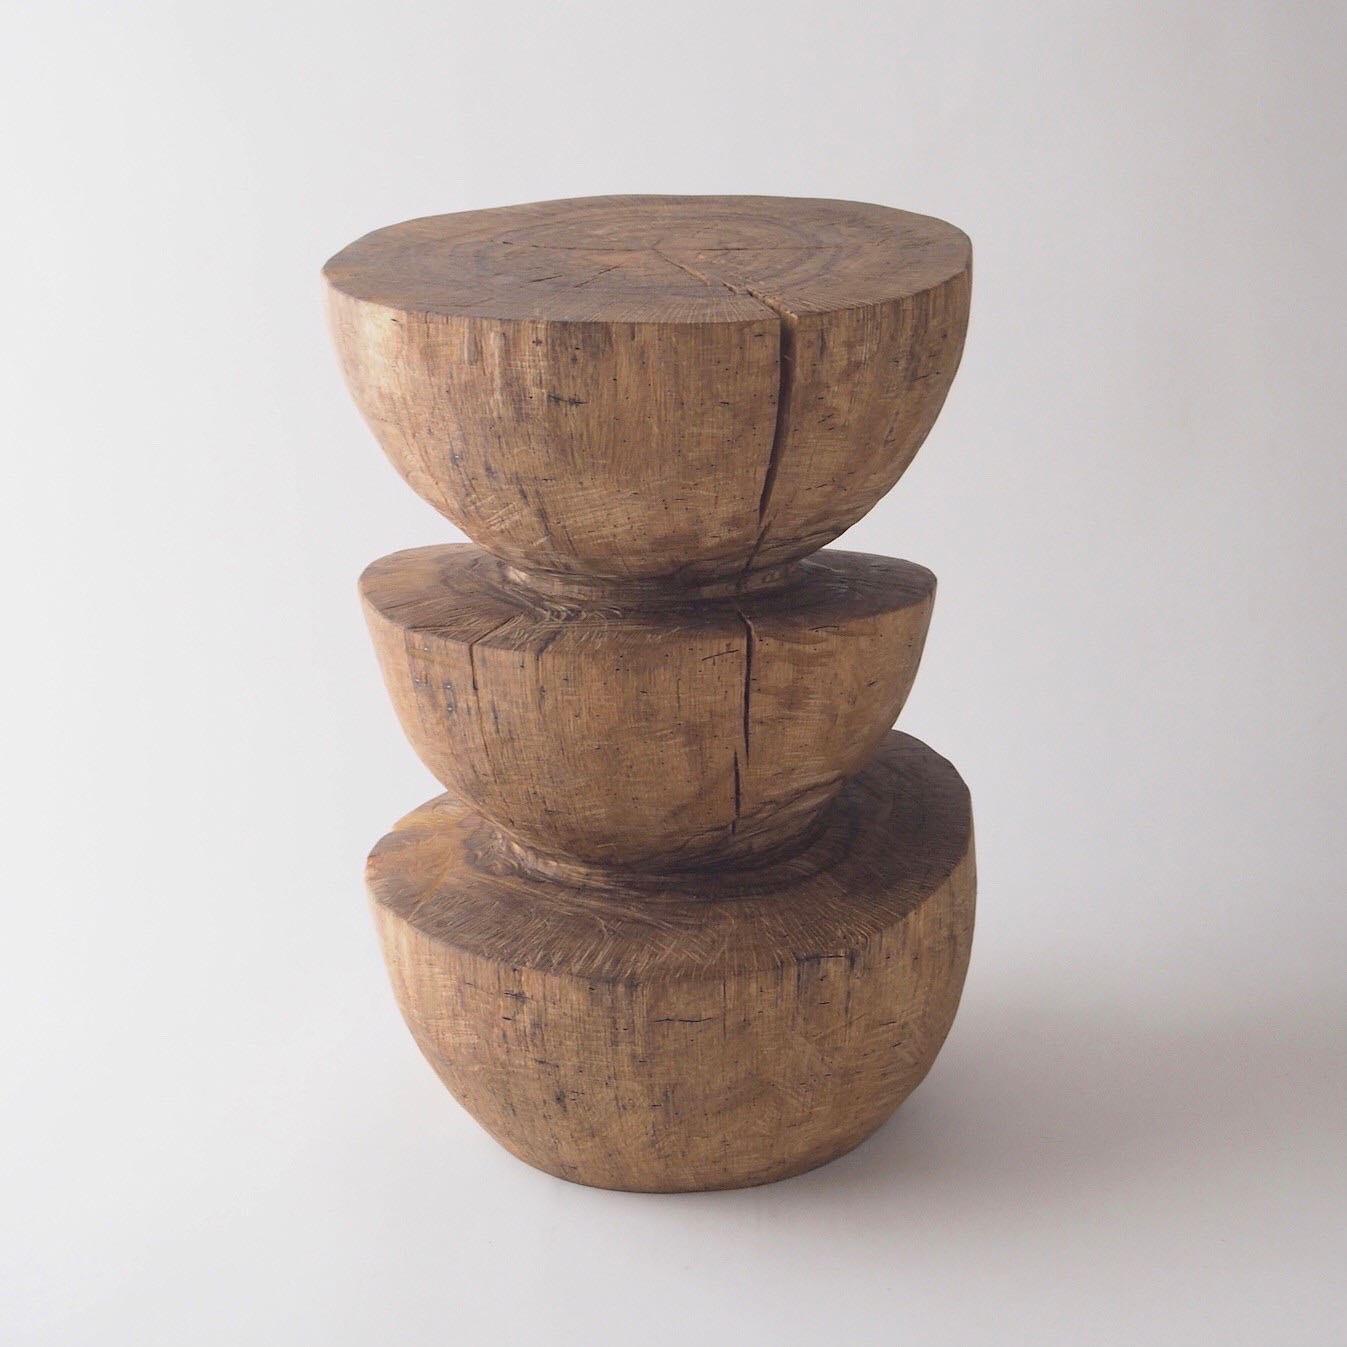 Hand-Carved Hiroyuki Nishimura Zougei Sculptural Side Table Stool 31 Tribal Glamping For Sale